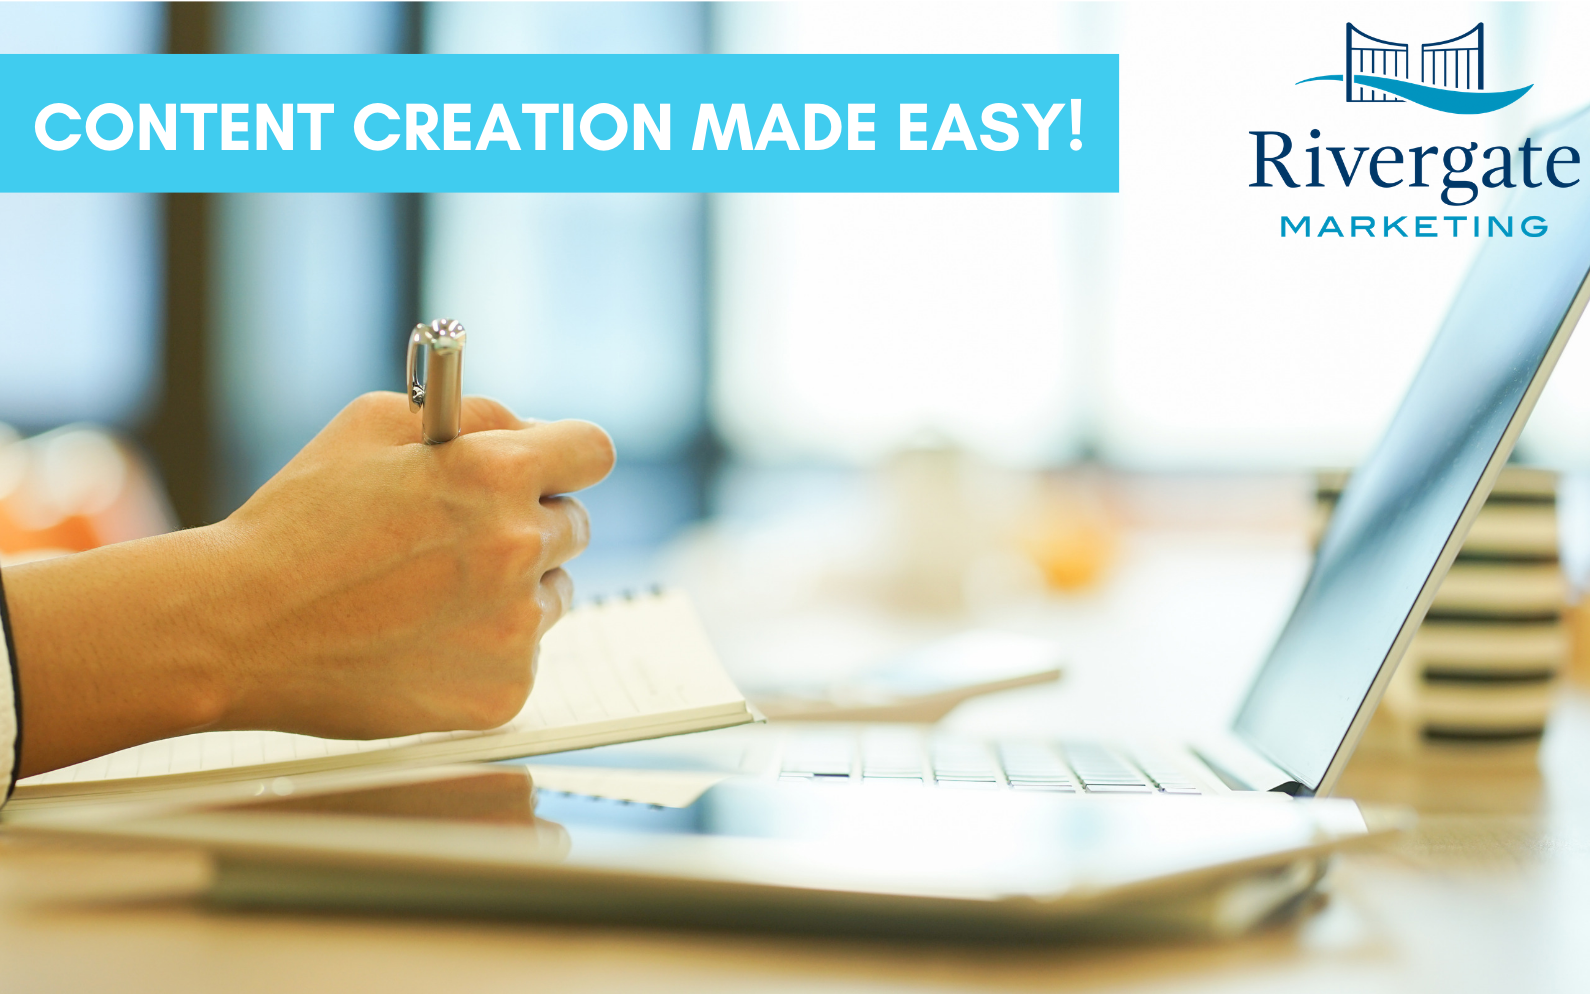 Rivergate Marketing content creation made easy